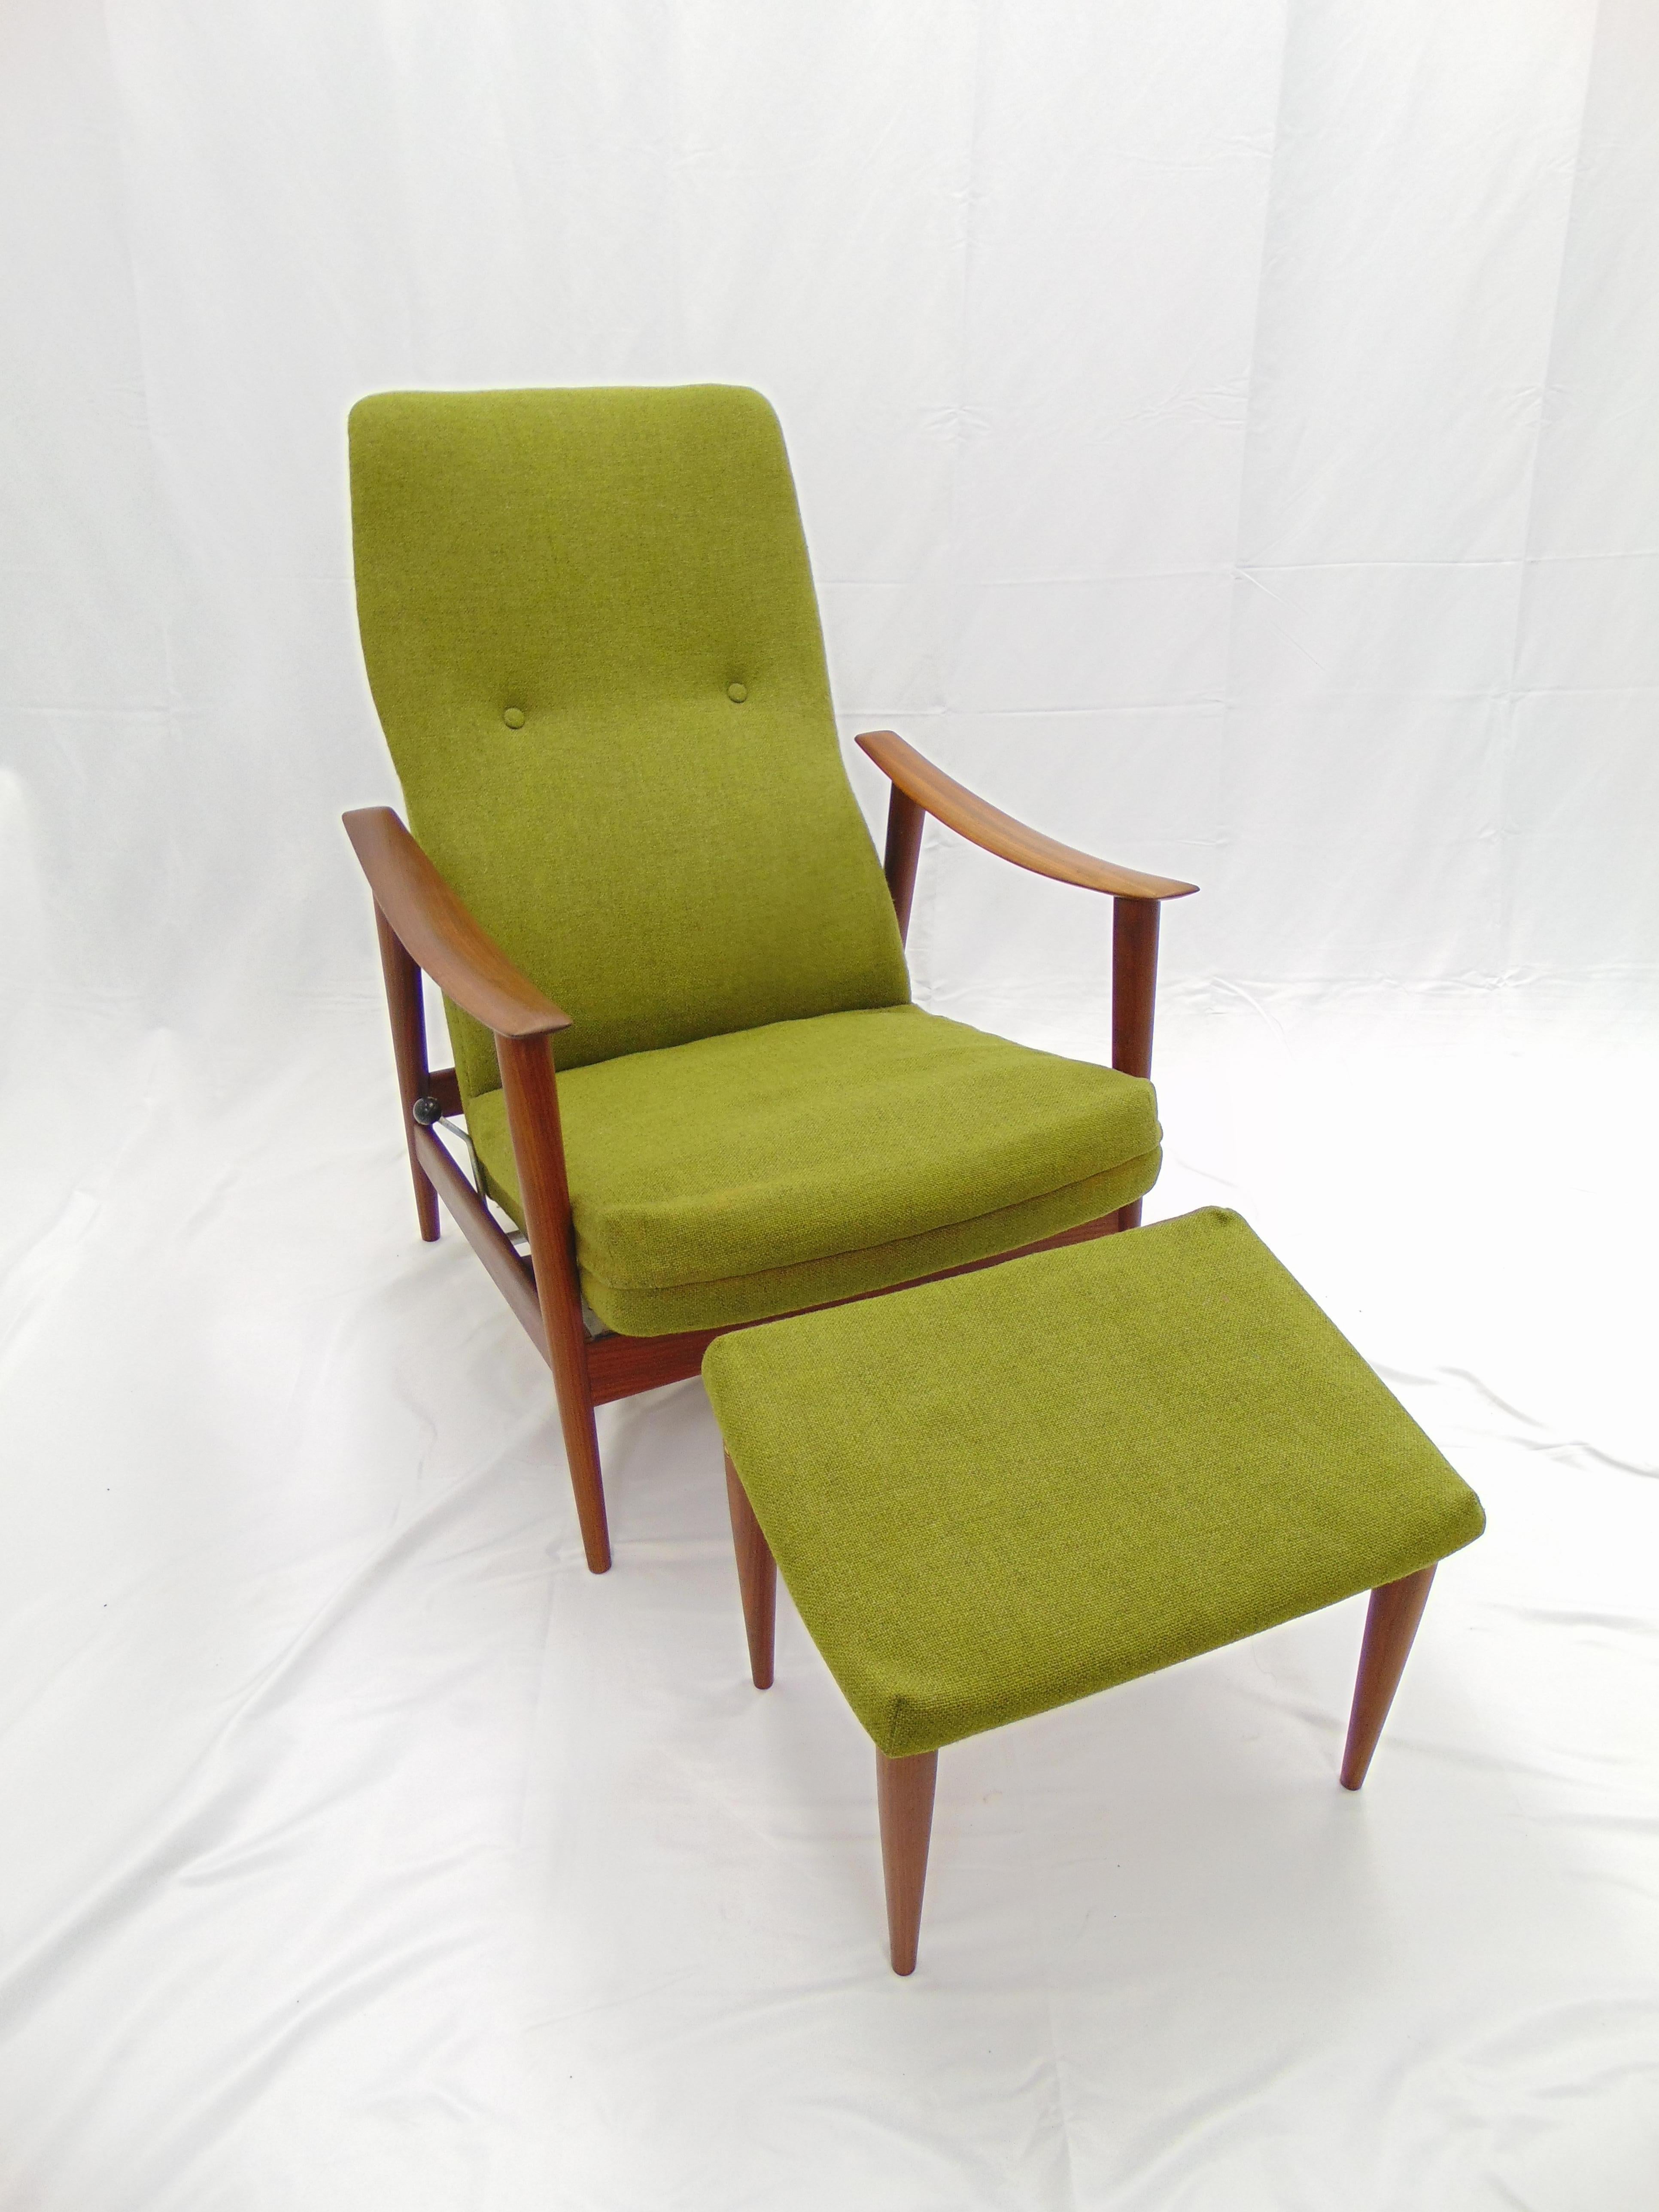 This is a wonderful vintage 1960s Stokke recliner chair and matching ottoman by Stokke distributed by Westnofa.
It is still in original vintage condition. The ottoman is adjustable as well with a wood flap that can add an angle or make the ottoman